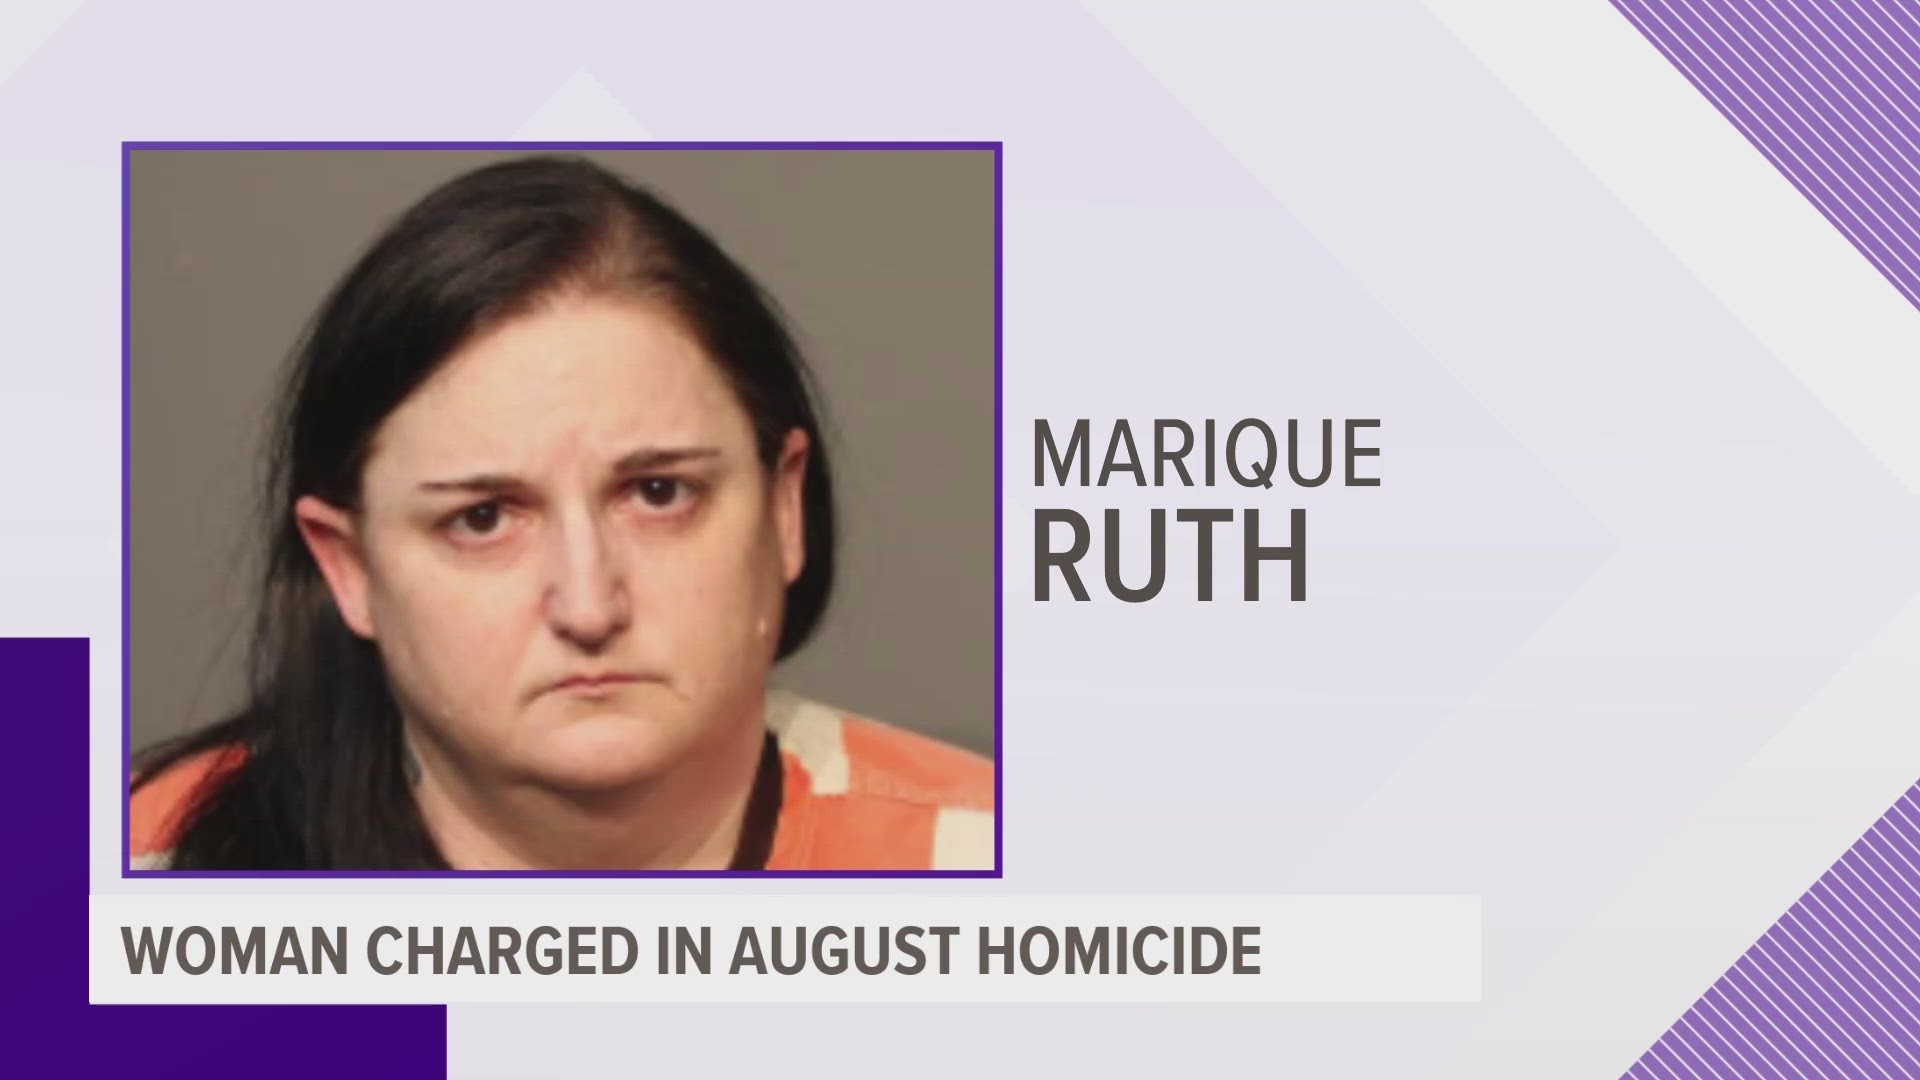 43-year-old Marique Ruth, of Altoona, is charged with murder in the first-degree for allegedly killing 41-year-old John Killen.